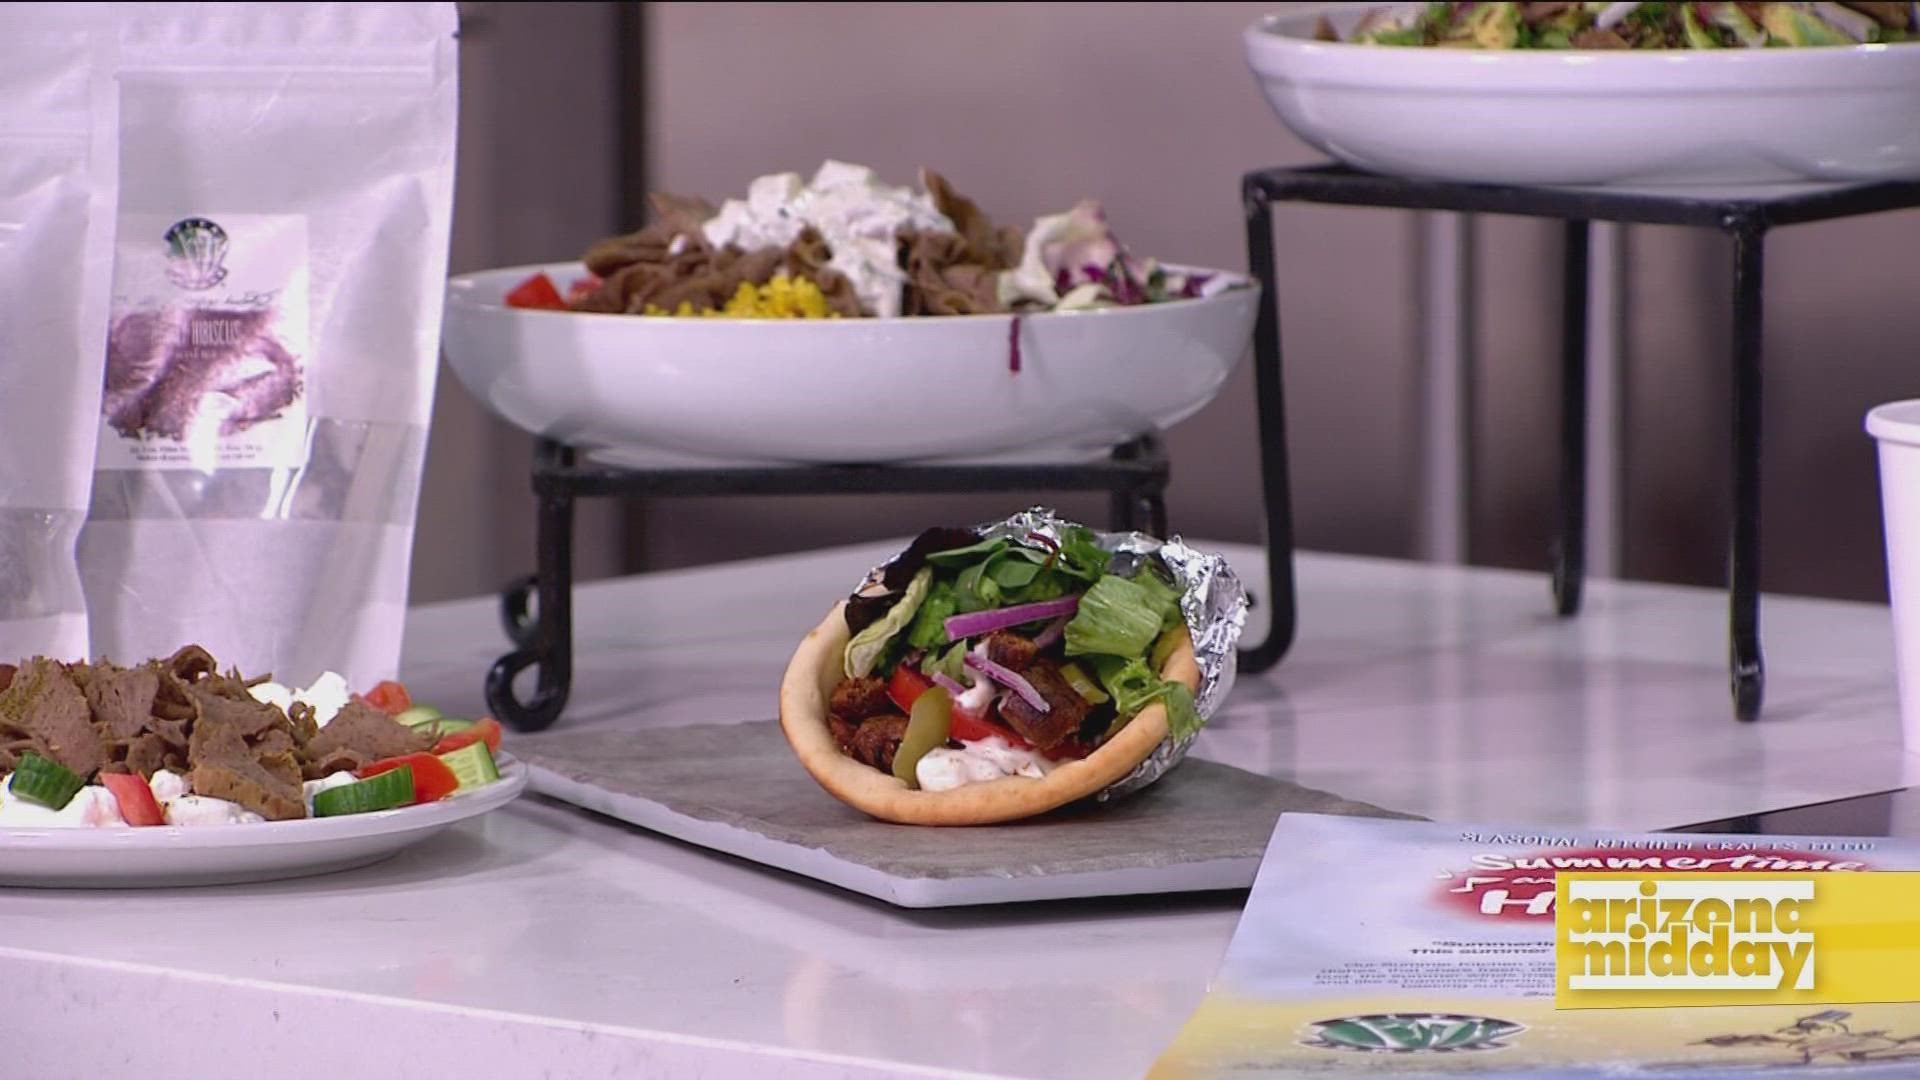 Bassel Osmani, co-founder of Pita Jungle shows us how to make a gyro and the correct pronunciation.